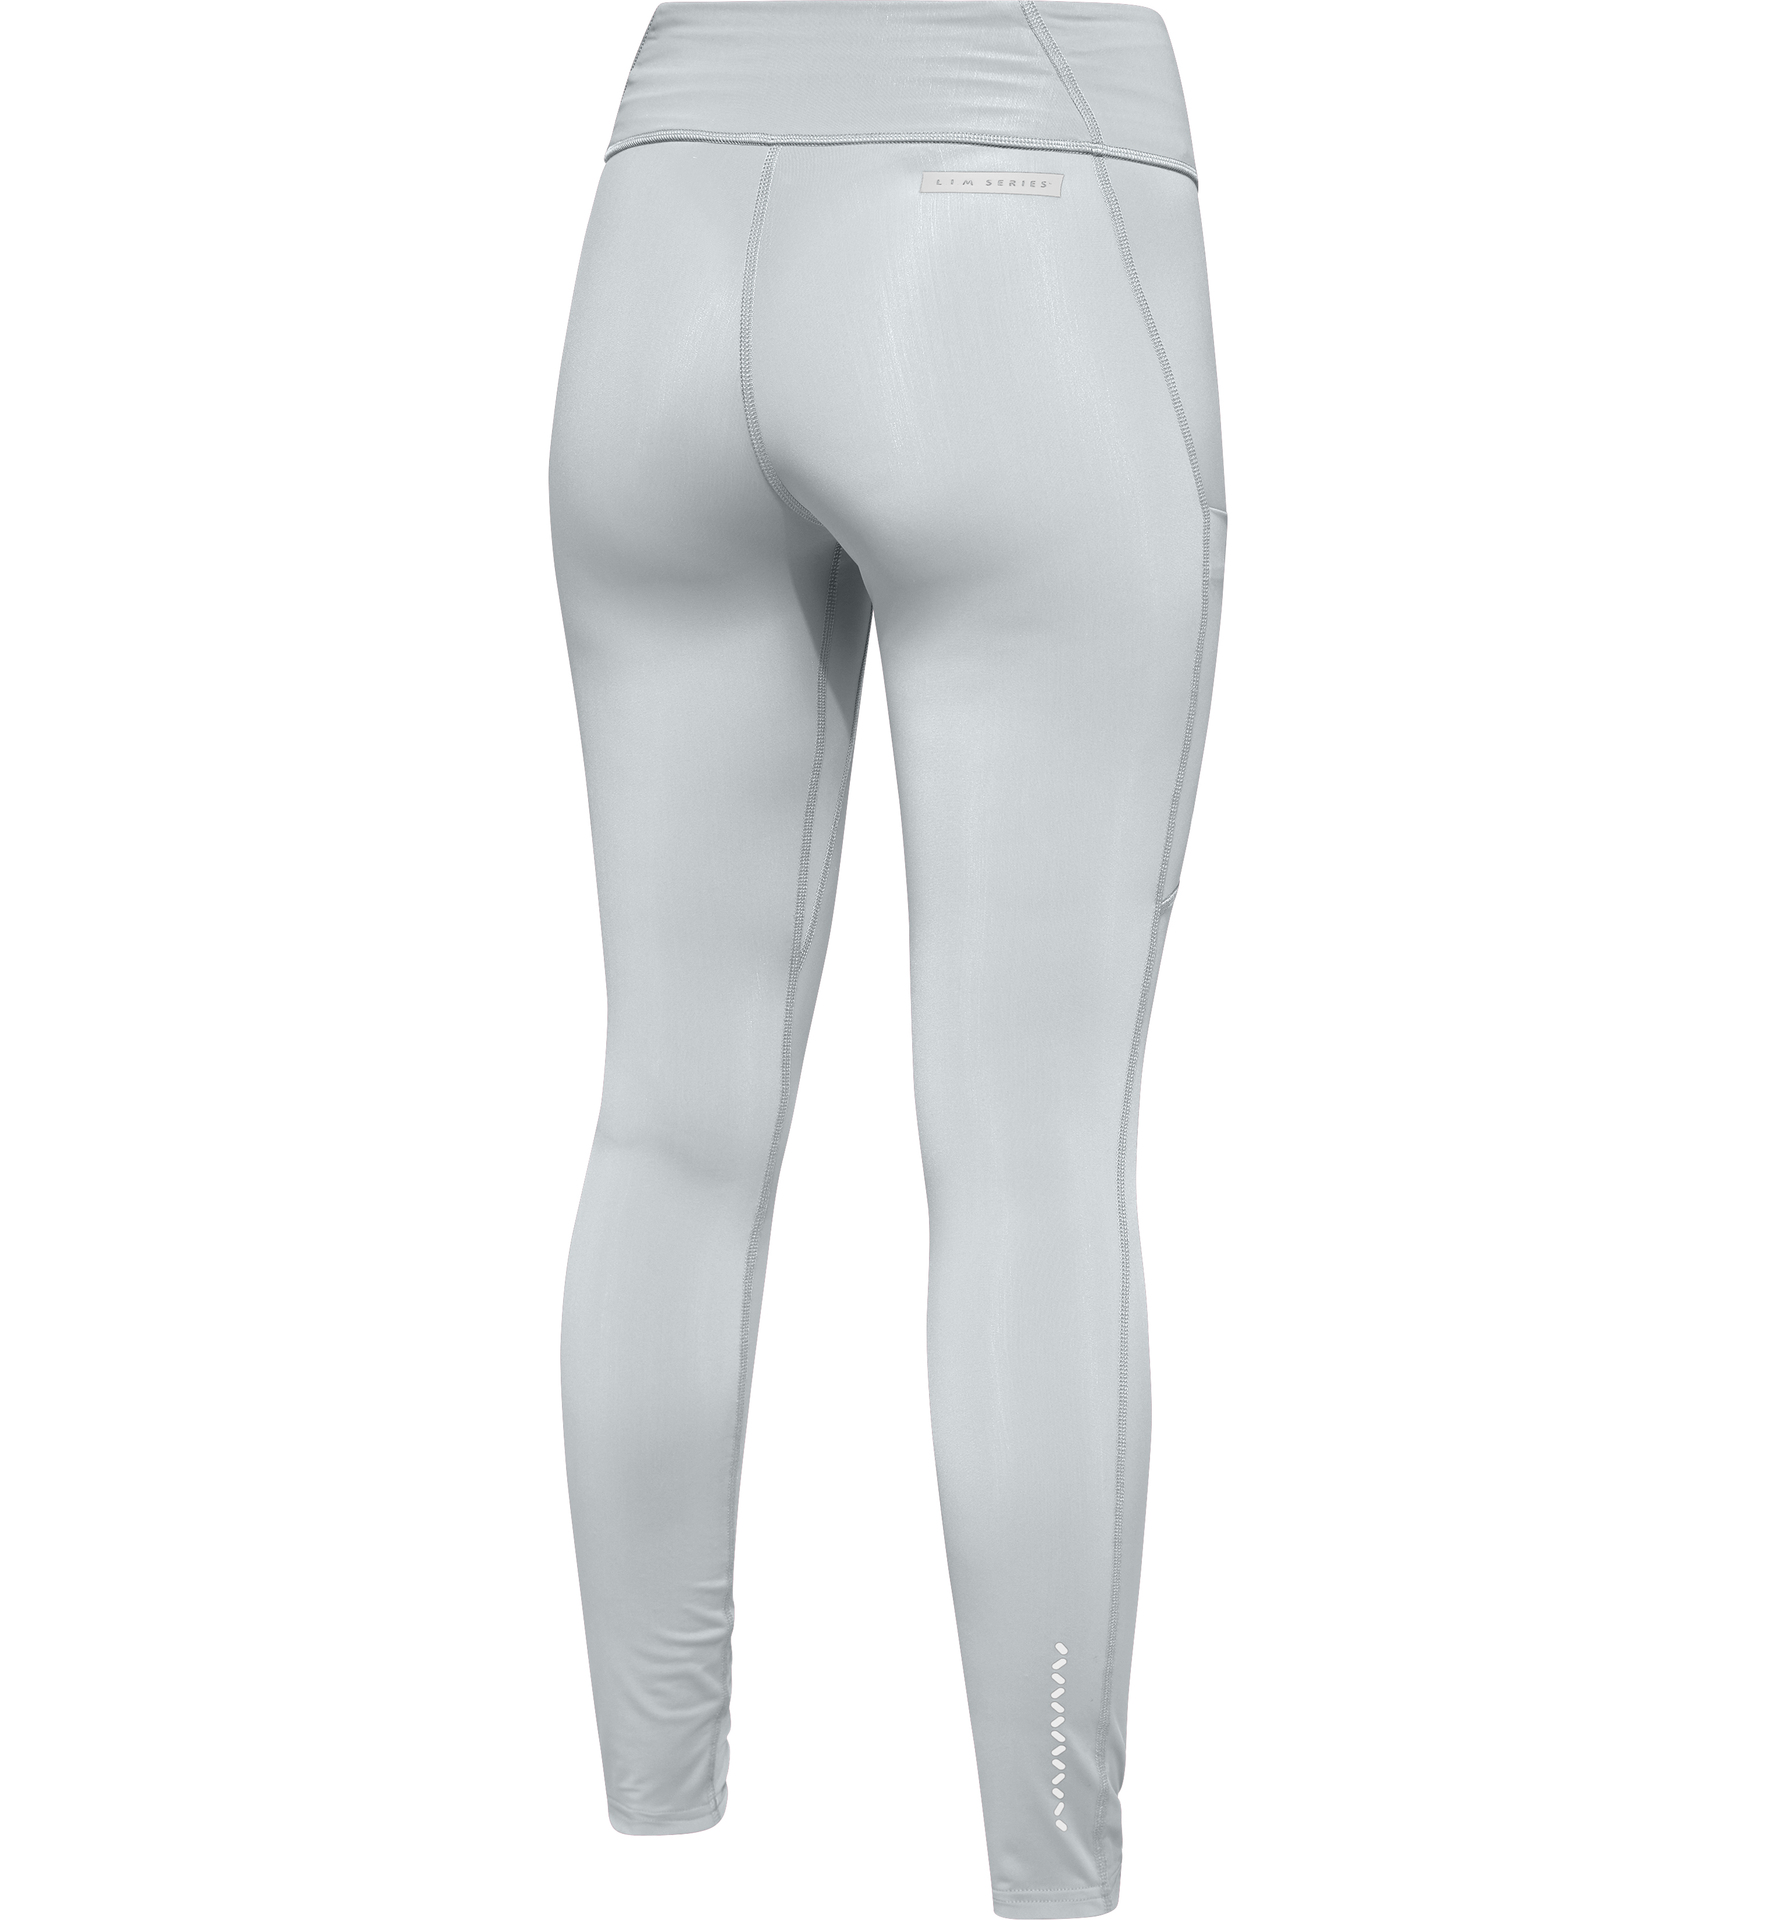 L.I.M Leap Tights Women, Stone Grey, L.I.M, Collection